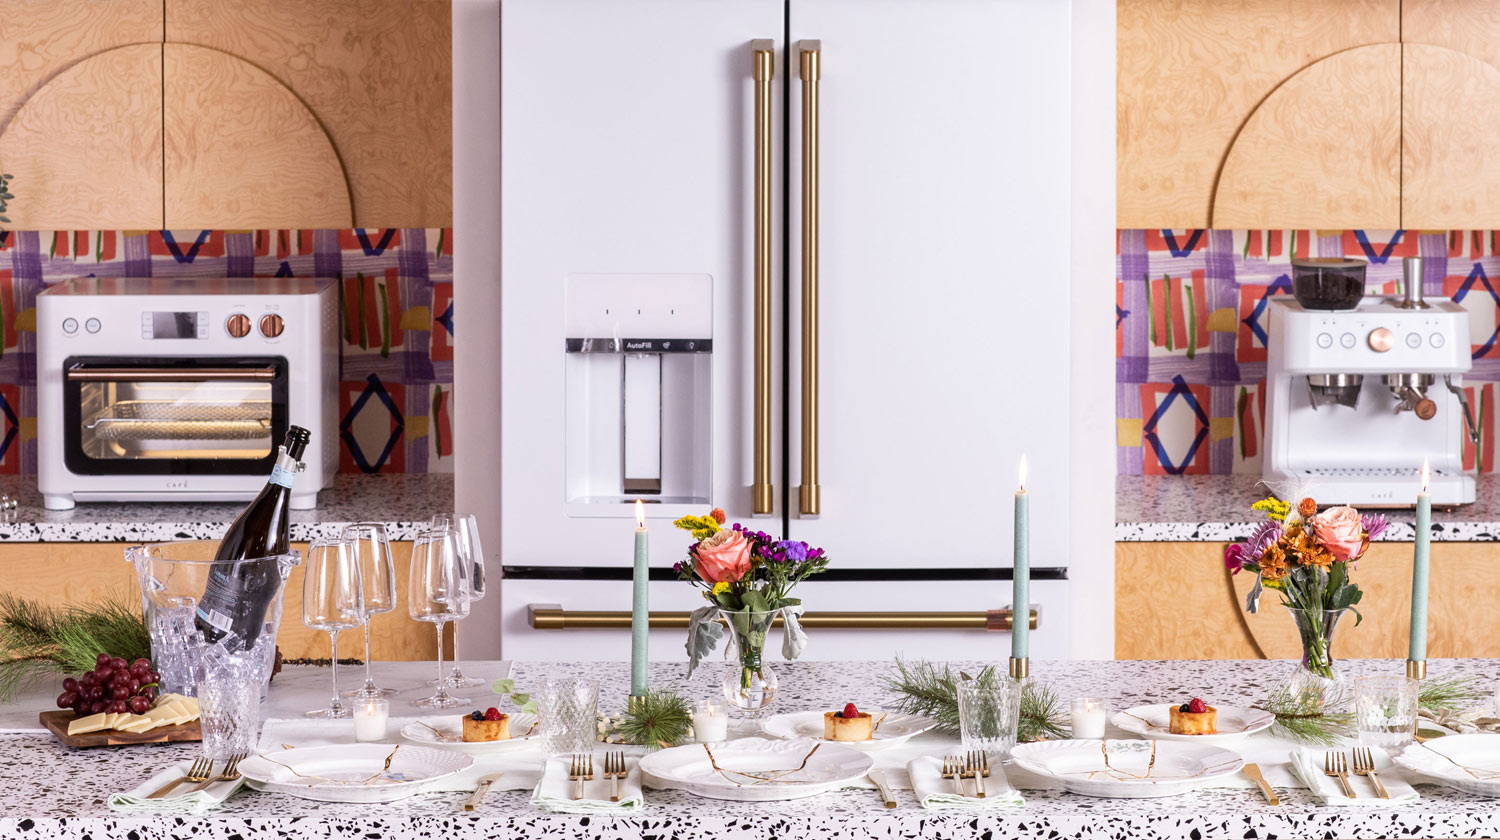 café refrigerator with table settings in front